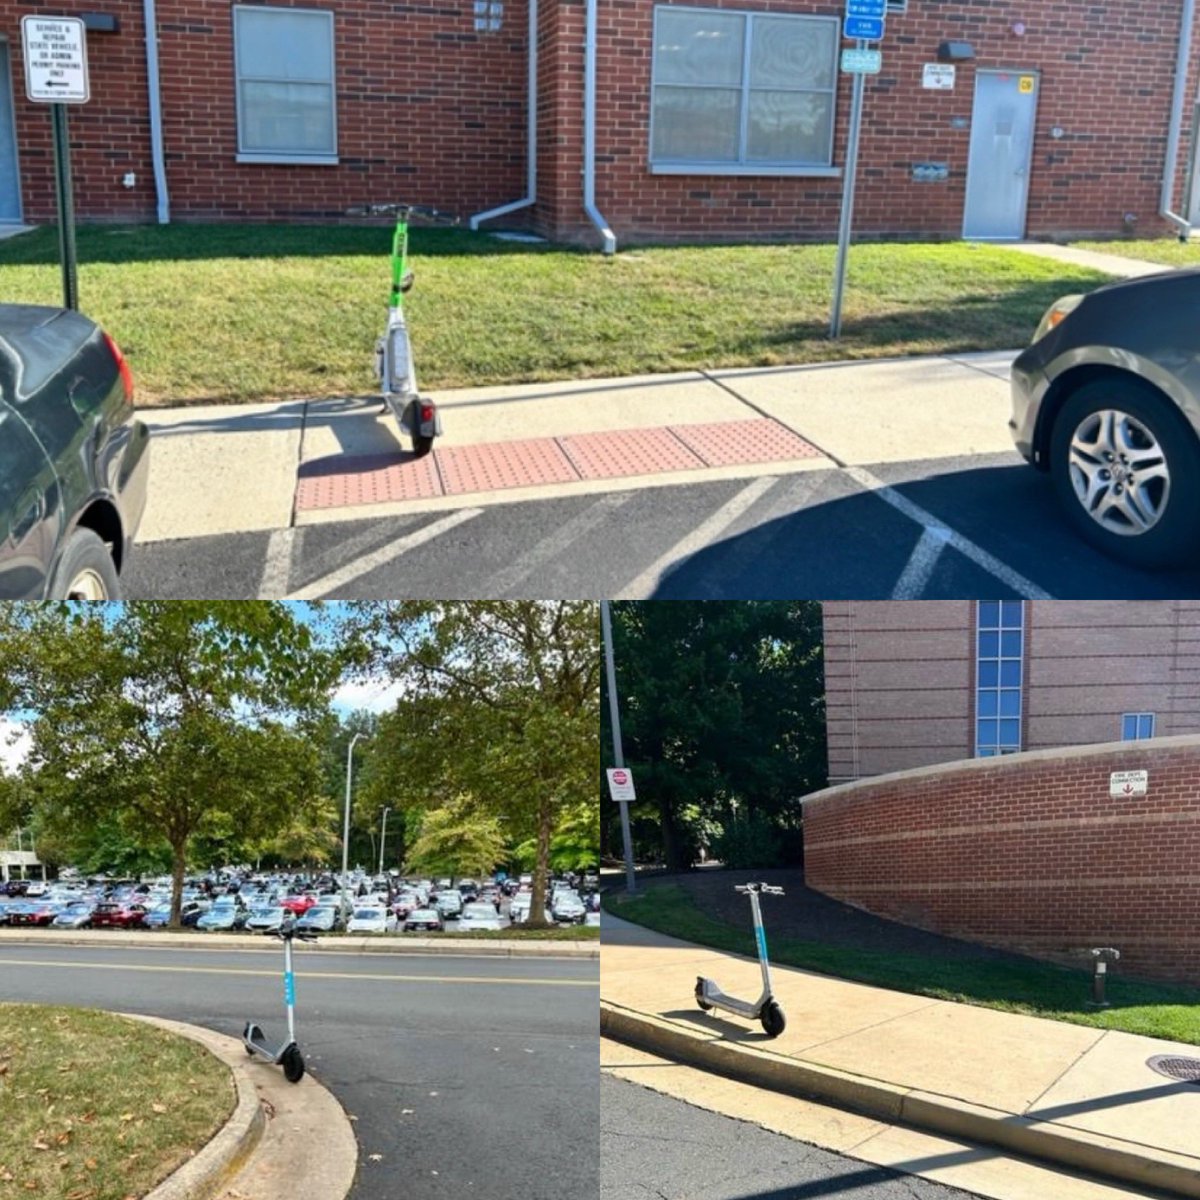 Please don’t park your scooter like this. Share the campus with all your fellow Patriots. Don’t block accessible parking areas, sidewalks and roads.

@birdride @limebike @masonulife @masonstudentgov @shopmason @masonhousing @GeorgeMasonHR